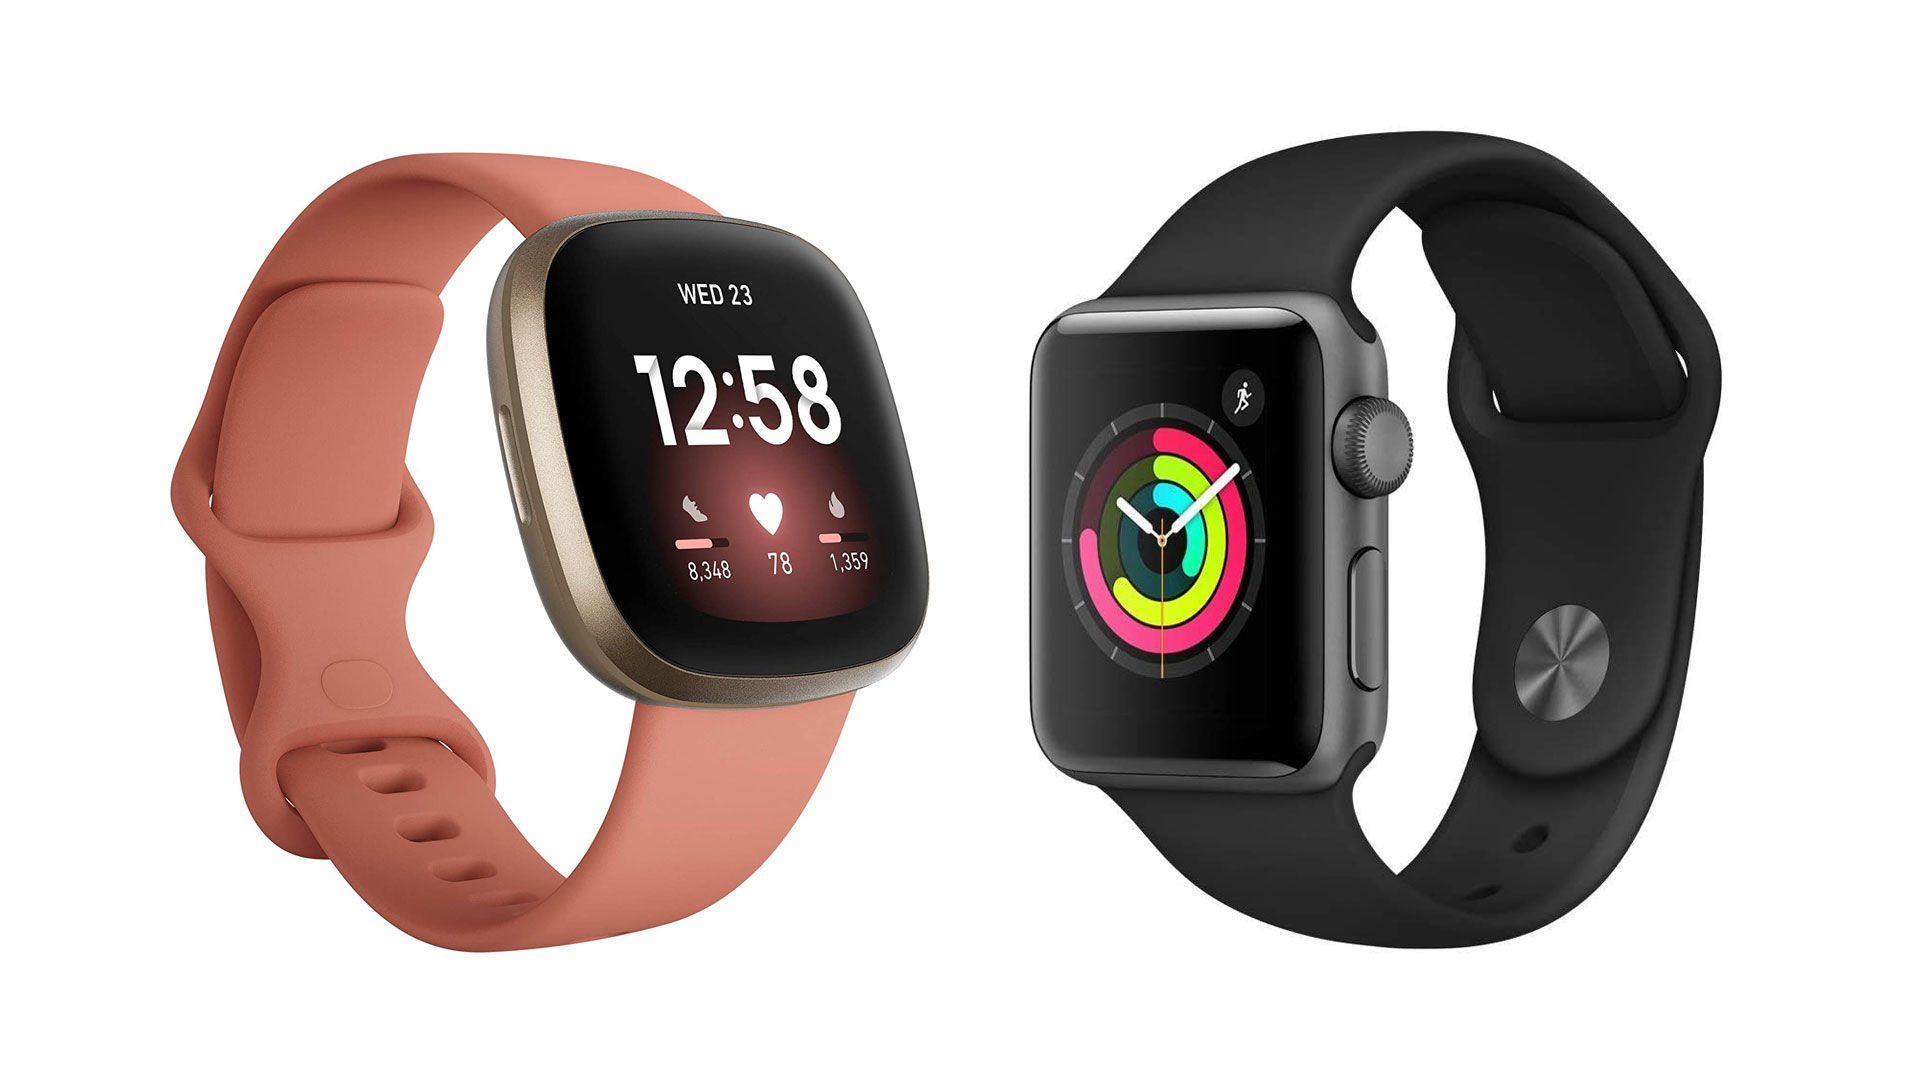 Fitbit vs Apple Watch: Which is better? image shows fitbit and apple watch side by side